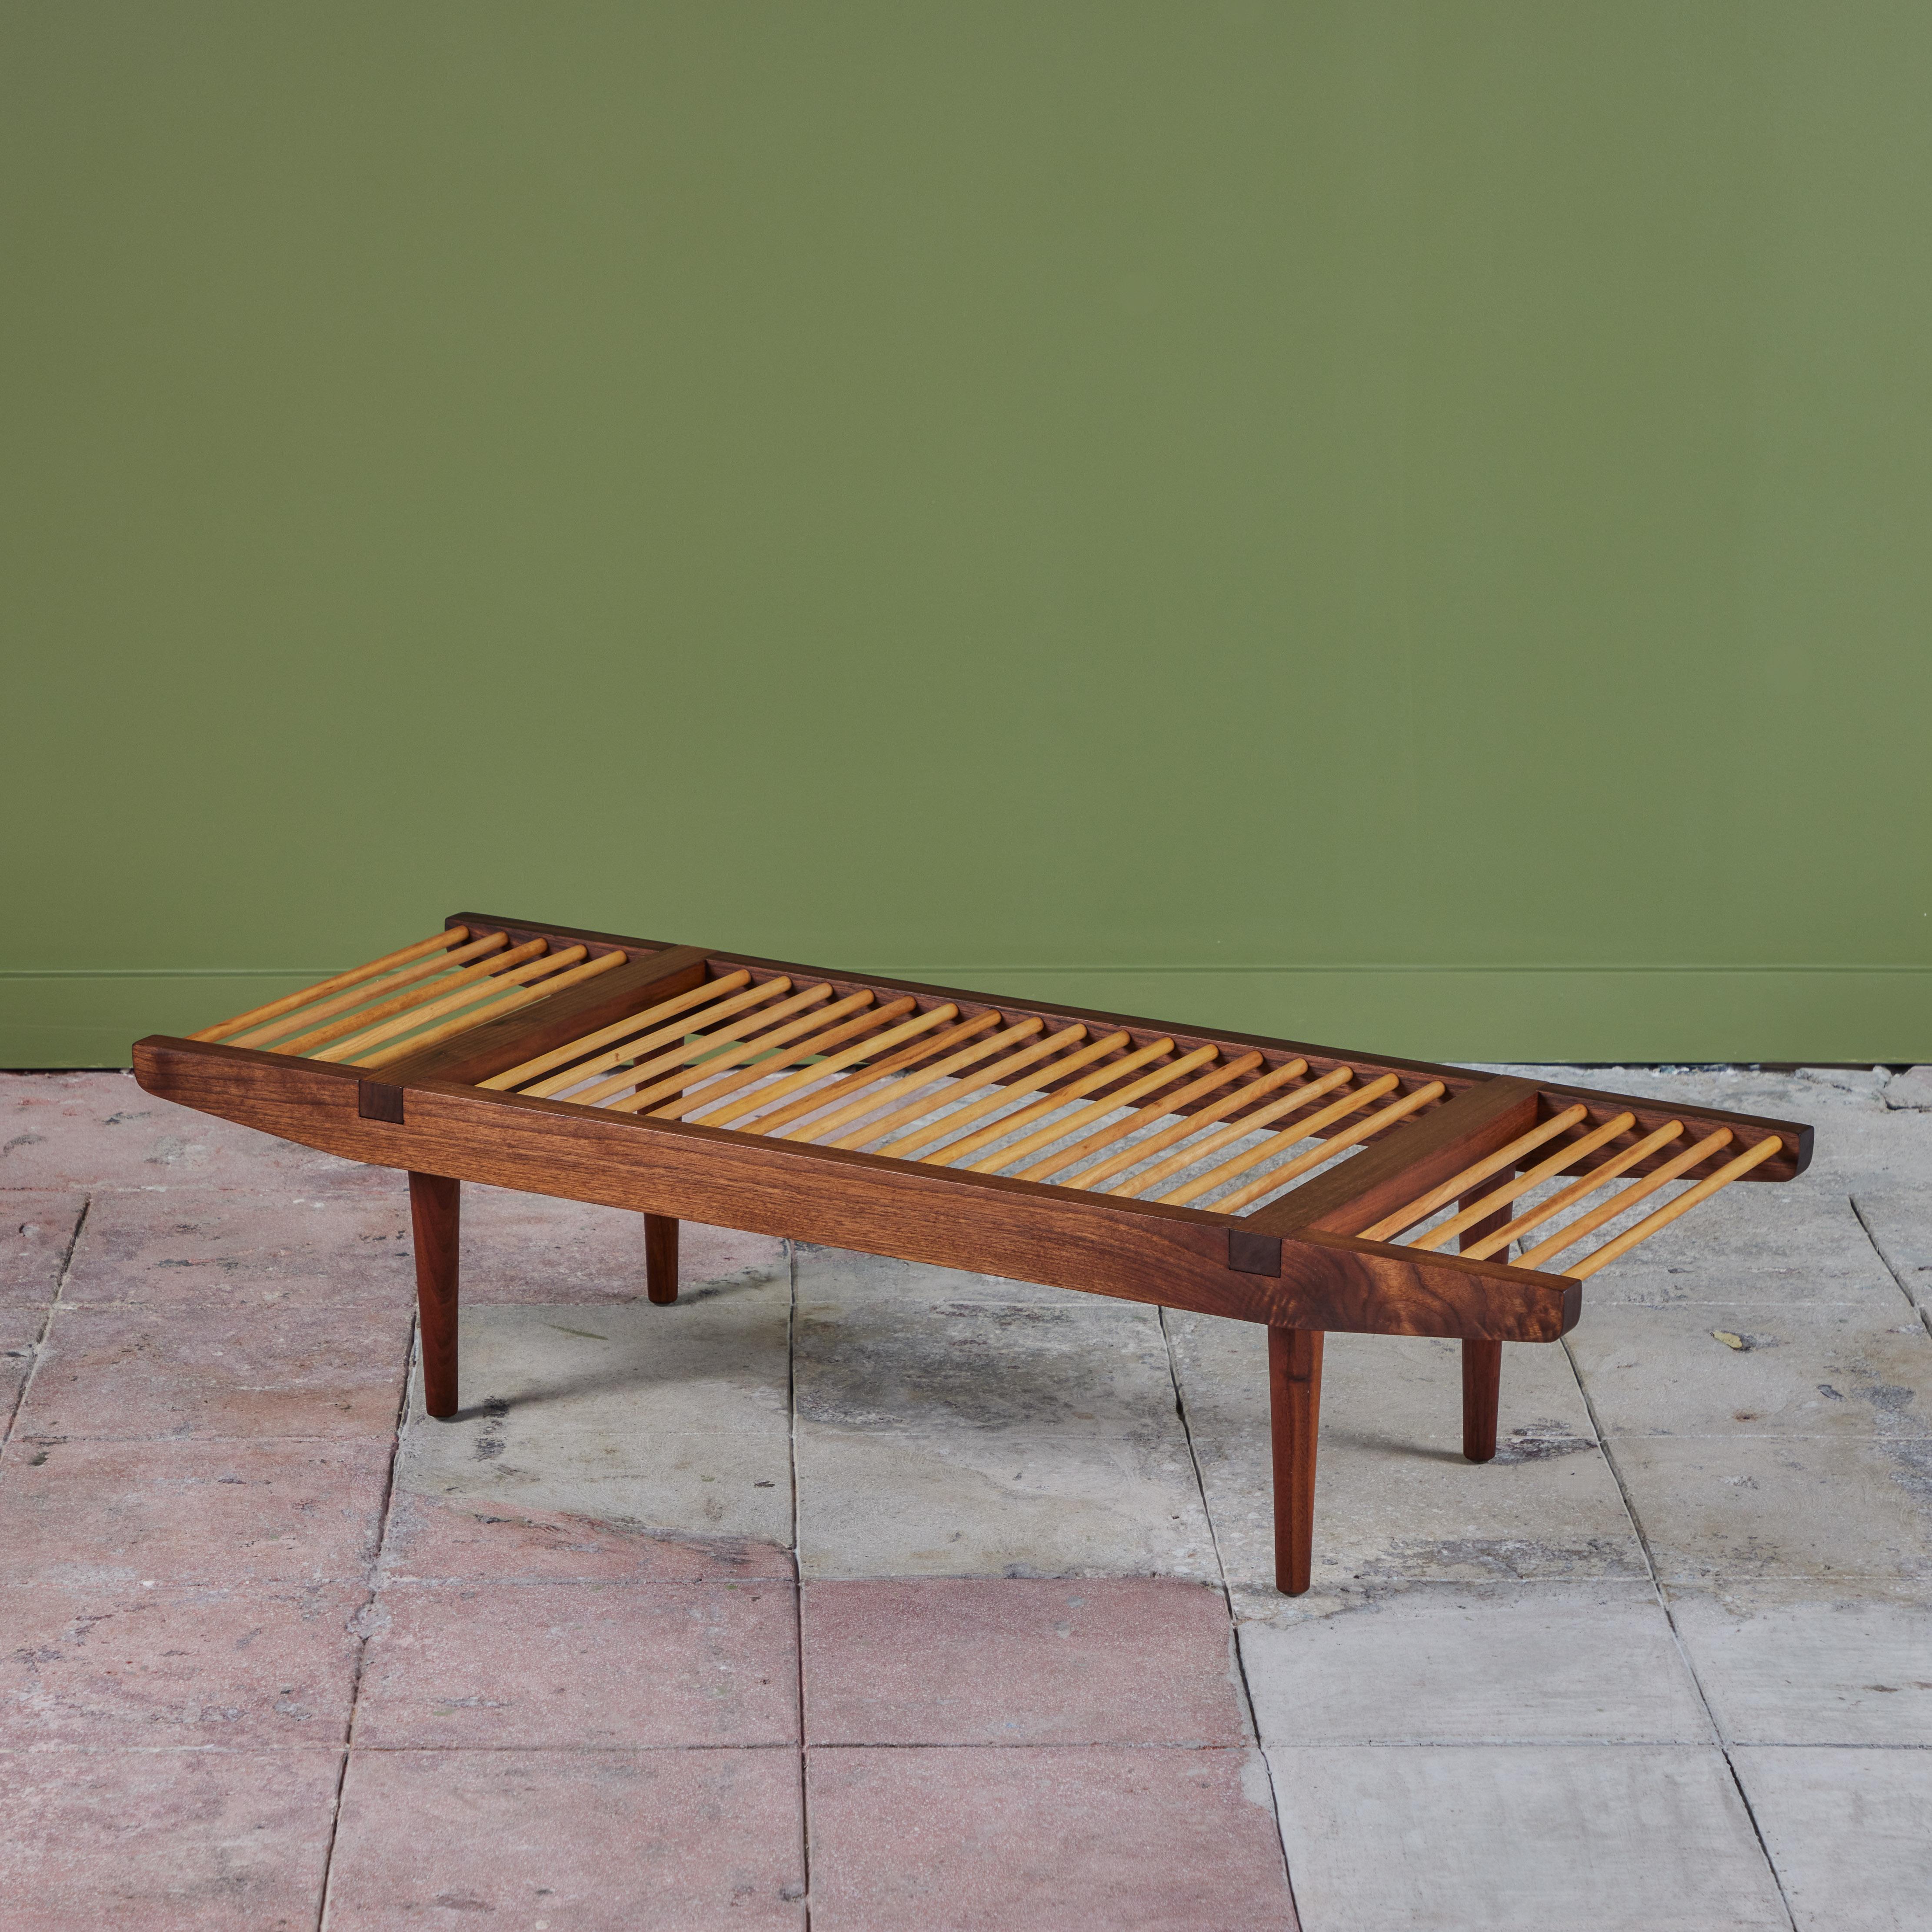 A multifunctional piece designed in the 1950s by Milo Baughman for Glenn of California. Most commonly seen as a bench, the piece has a walnut frame that tapers towards each end with walnut spacers and delicate rounded legs. The seat is created from